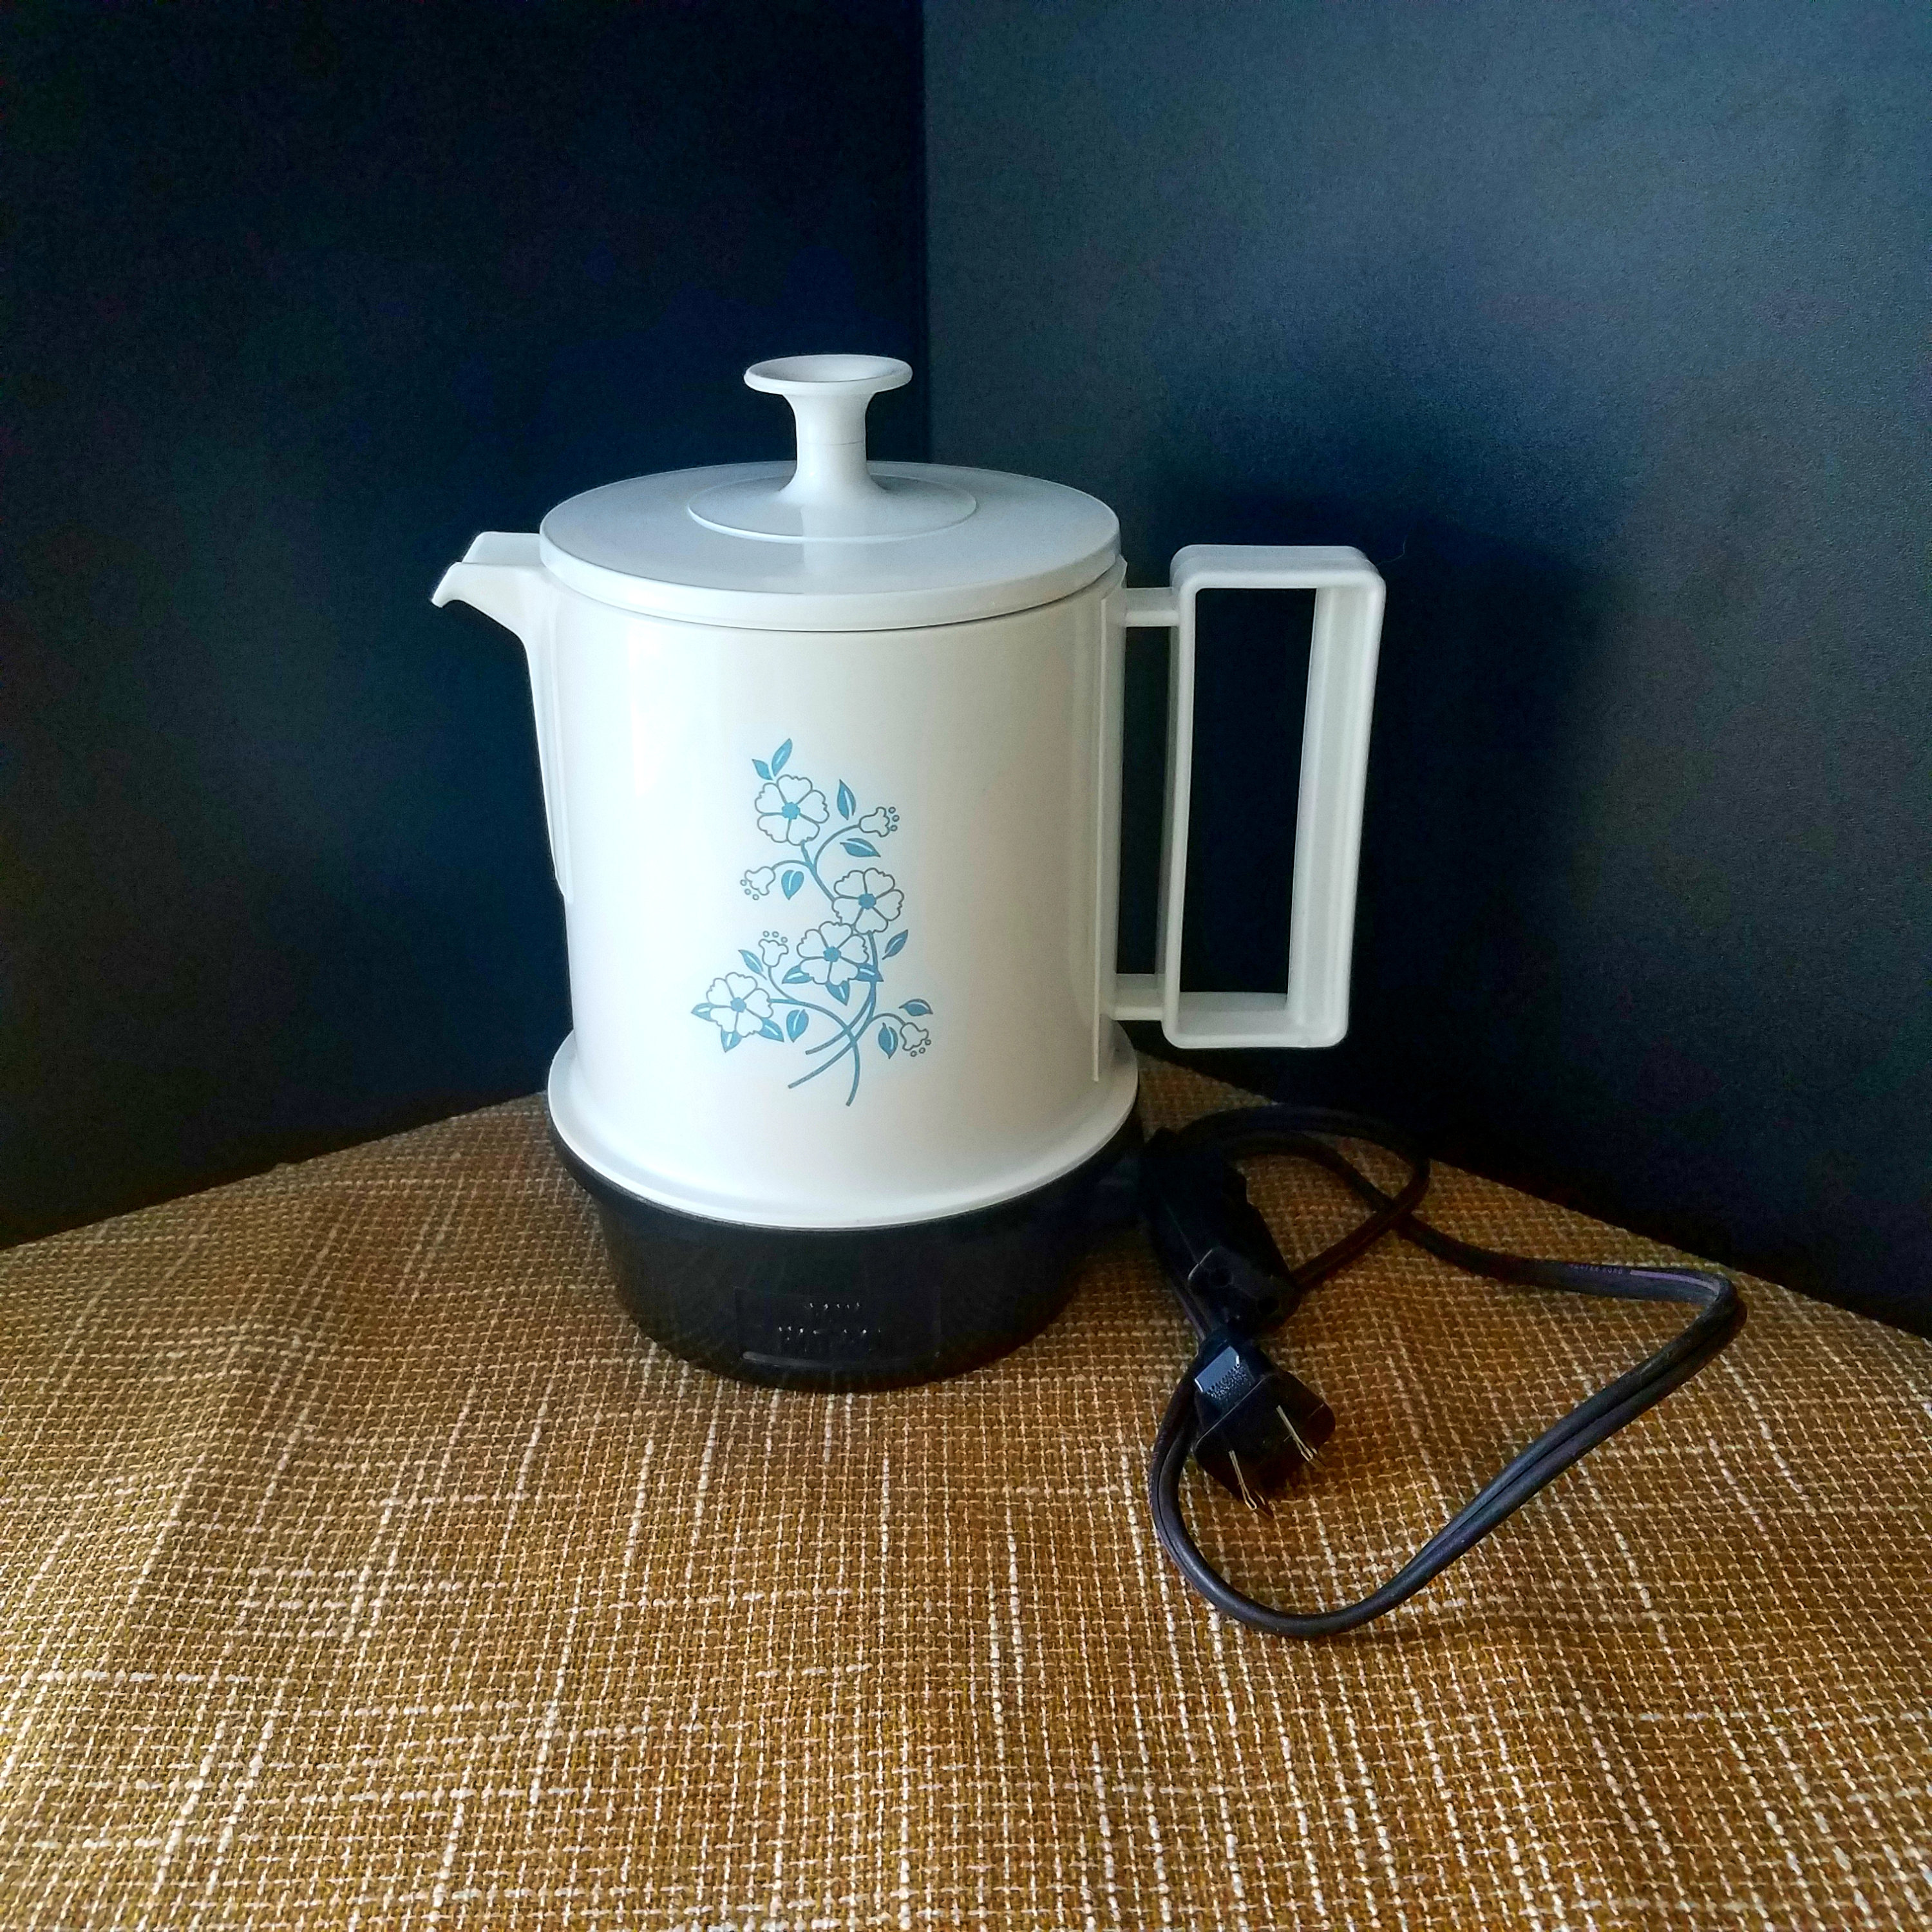 SANYO Tourist Electric Pot, Travel Kettle, Hotel Rooms, Camping, Dorms,  Dual Voltage 120 & 240V, Plug Adapter, Coffee, Tea, Hot Pot, WORKS 